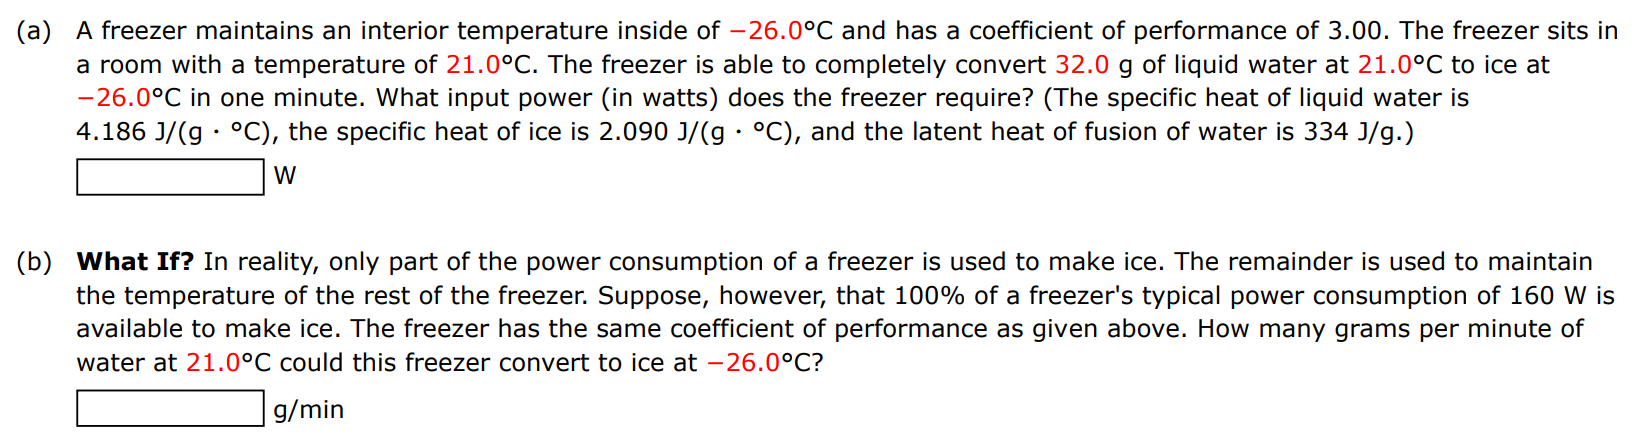 (a) A freezer maintains an interior temperature inside of −26.0∘C and has a coefficient of performance of 3.00 . The freezer sits in a room with a temperature of 21.0∘C. The freezer is able to completely convert 32.0 g of liquid water at 21.0∘C to ice at −26.0∘C in one minute. What input power (in watts) does the freezer require? (The specific heat of liquid water is 4.186 J/(g⋅∘C), the specific heat of ice is 2.090 J/(g⋅∘C), and the latent heat of fusion of water is 334 J/g. ) W (b) What If? In reality, only part of the power consumption of a freezer is used to make ice. The remainder is used to maintain the temperature of the rest of the freezer. Suppose, however, that 100% of a freezer's typical power consumption of 160 W is available to make ice. The freezer has the same coefficient of performance as given above. How many grams per minute of water at 21.0∘C could this freezer convert to ice at −26.0∘C? g/min 